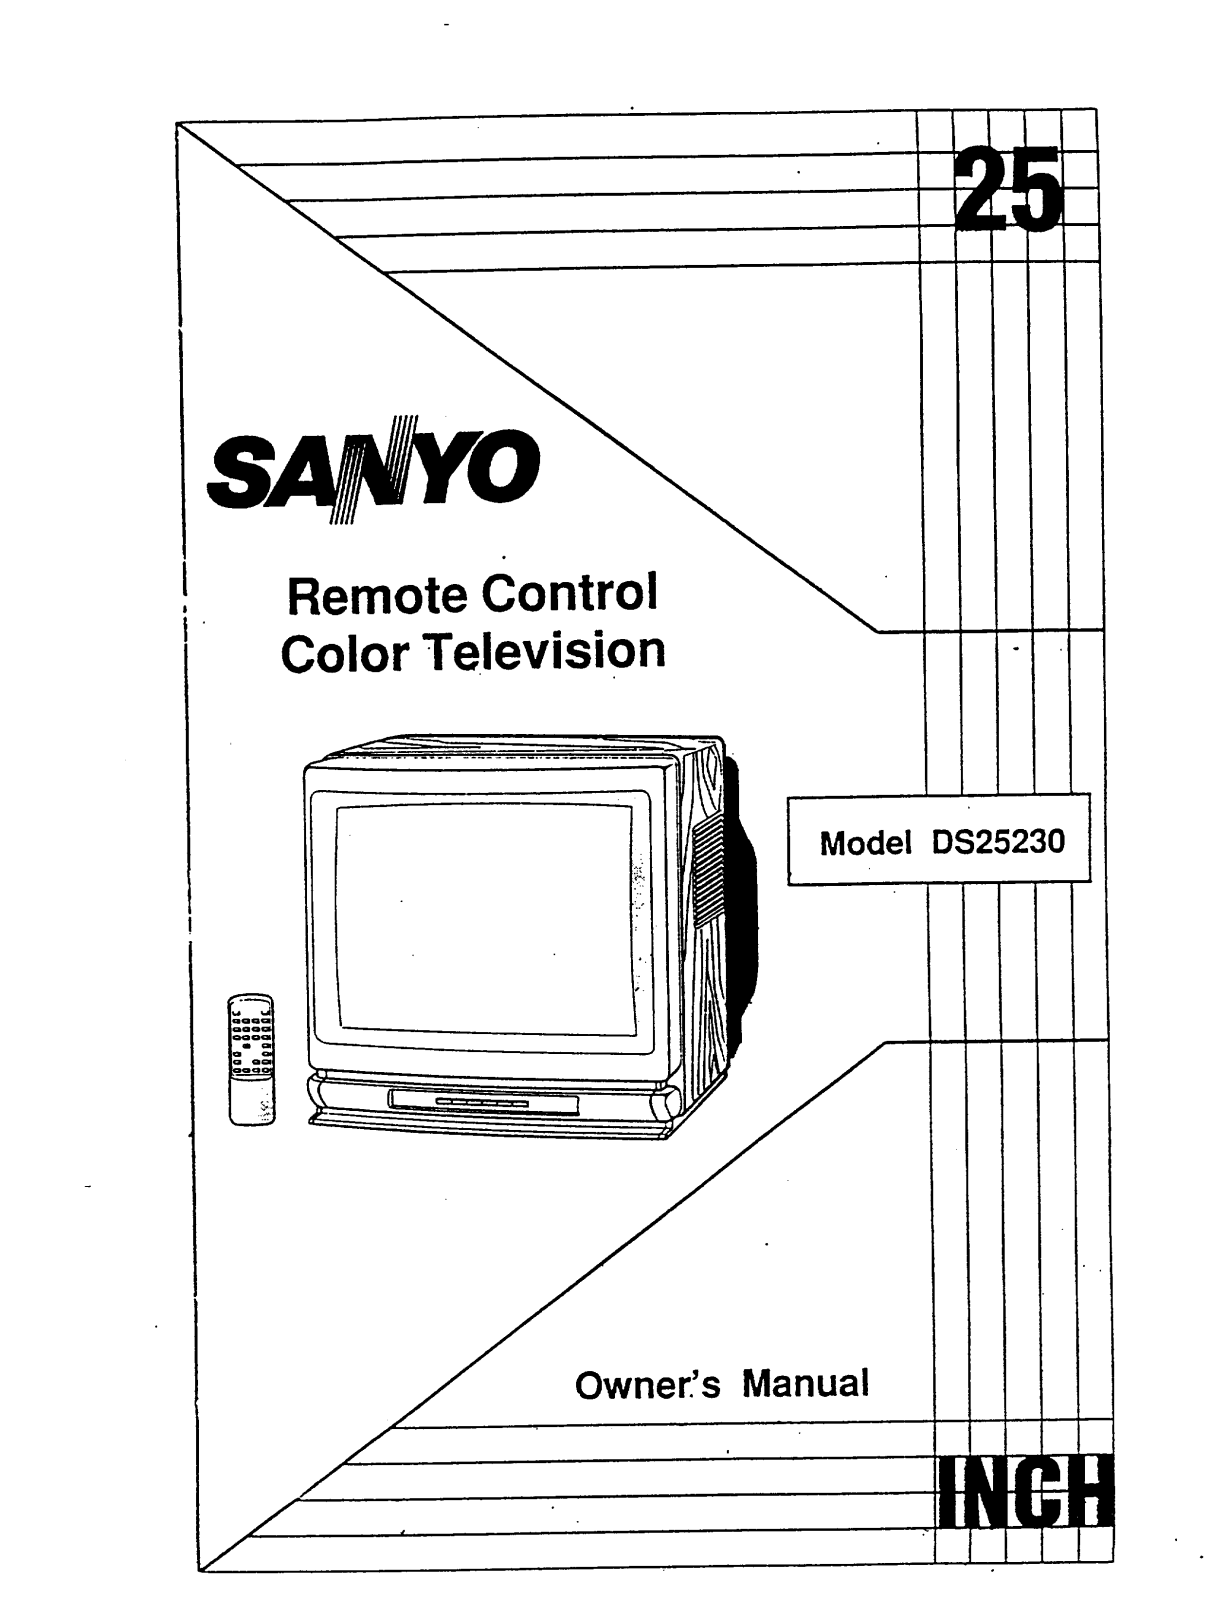 Sanyo DS25230 Owner’s Manual